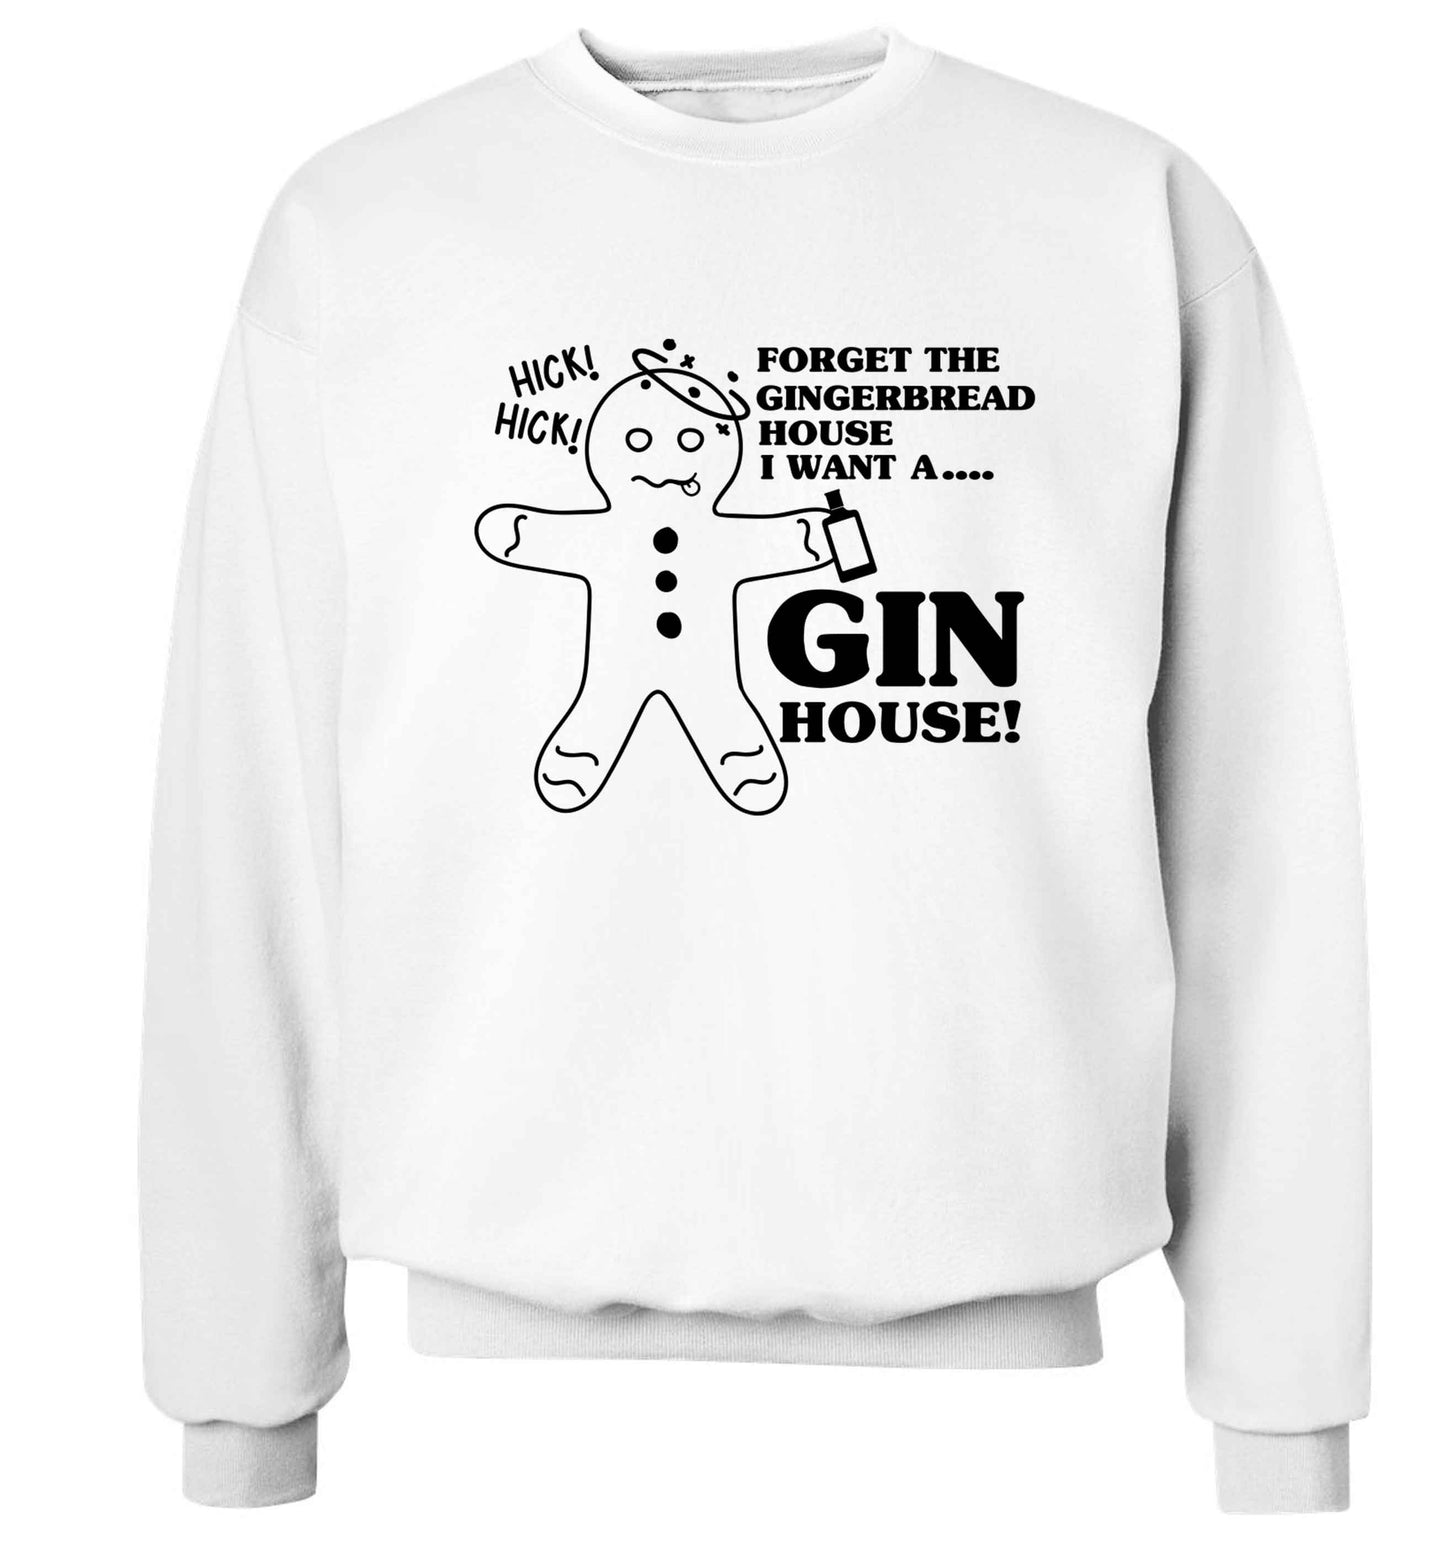 Forget the gingerbread house I want a gin house Adult's unisex white Sweater 2XL